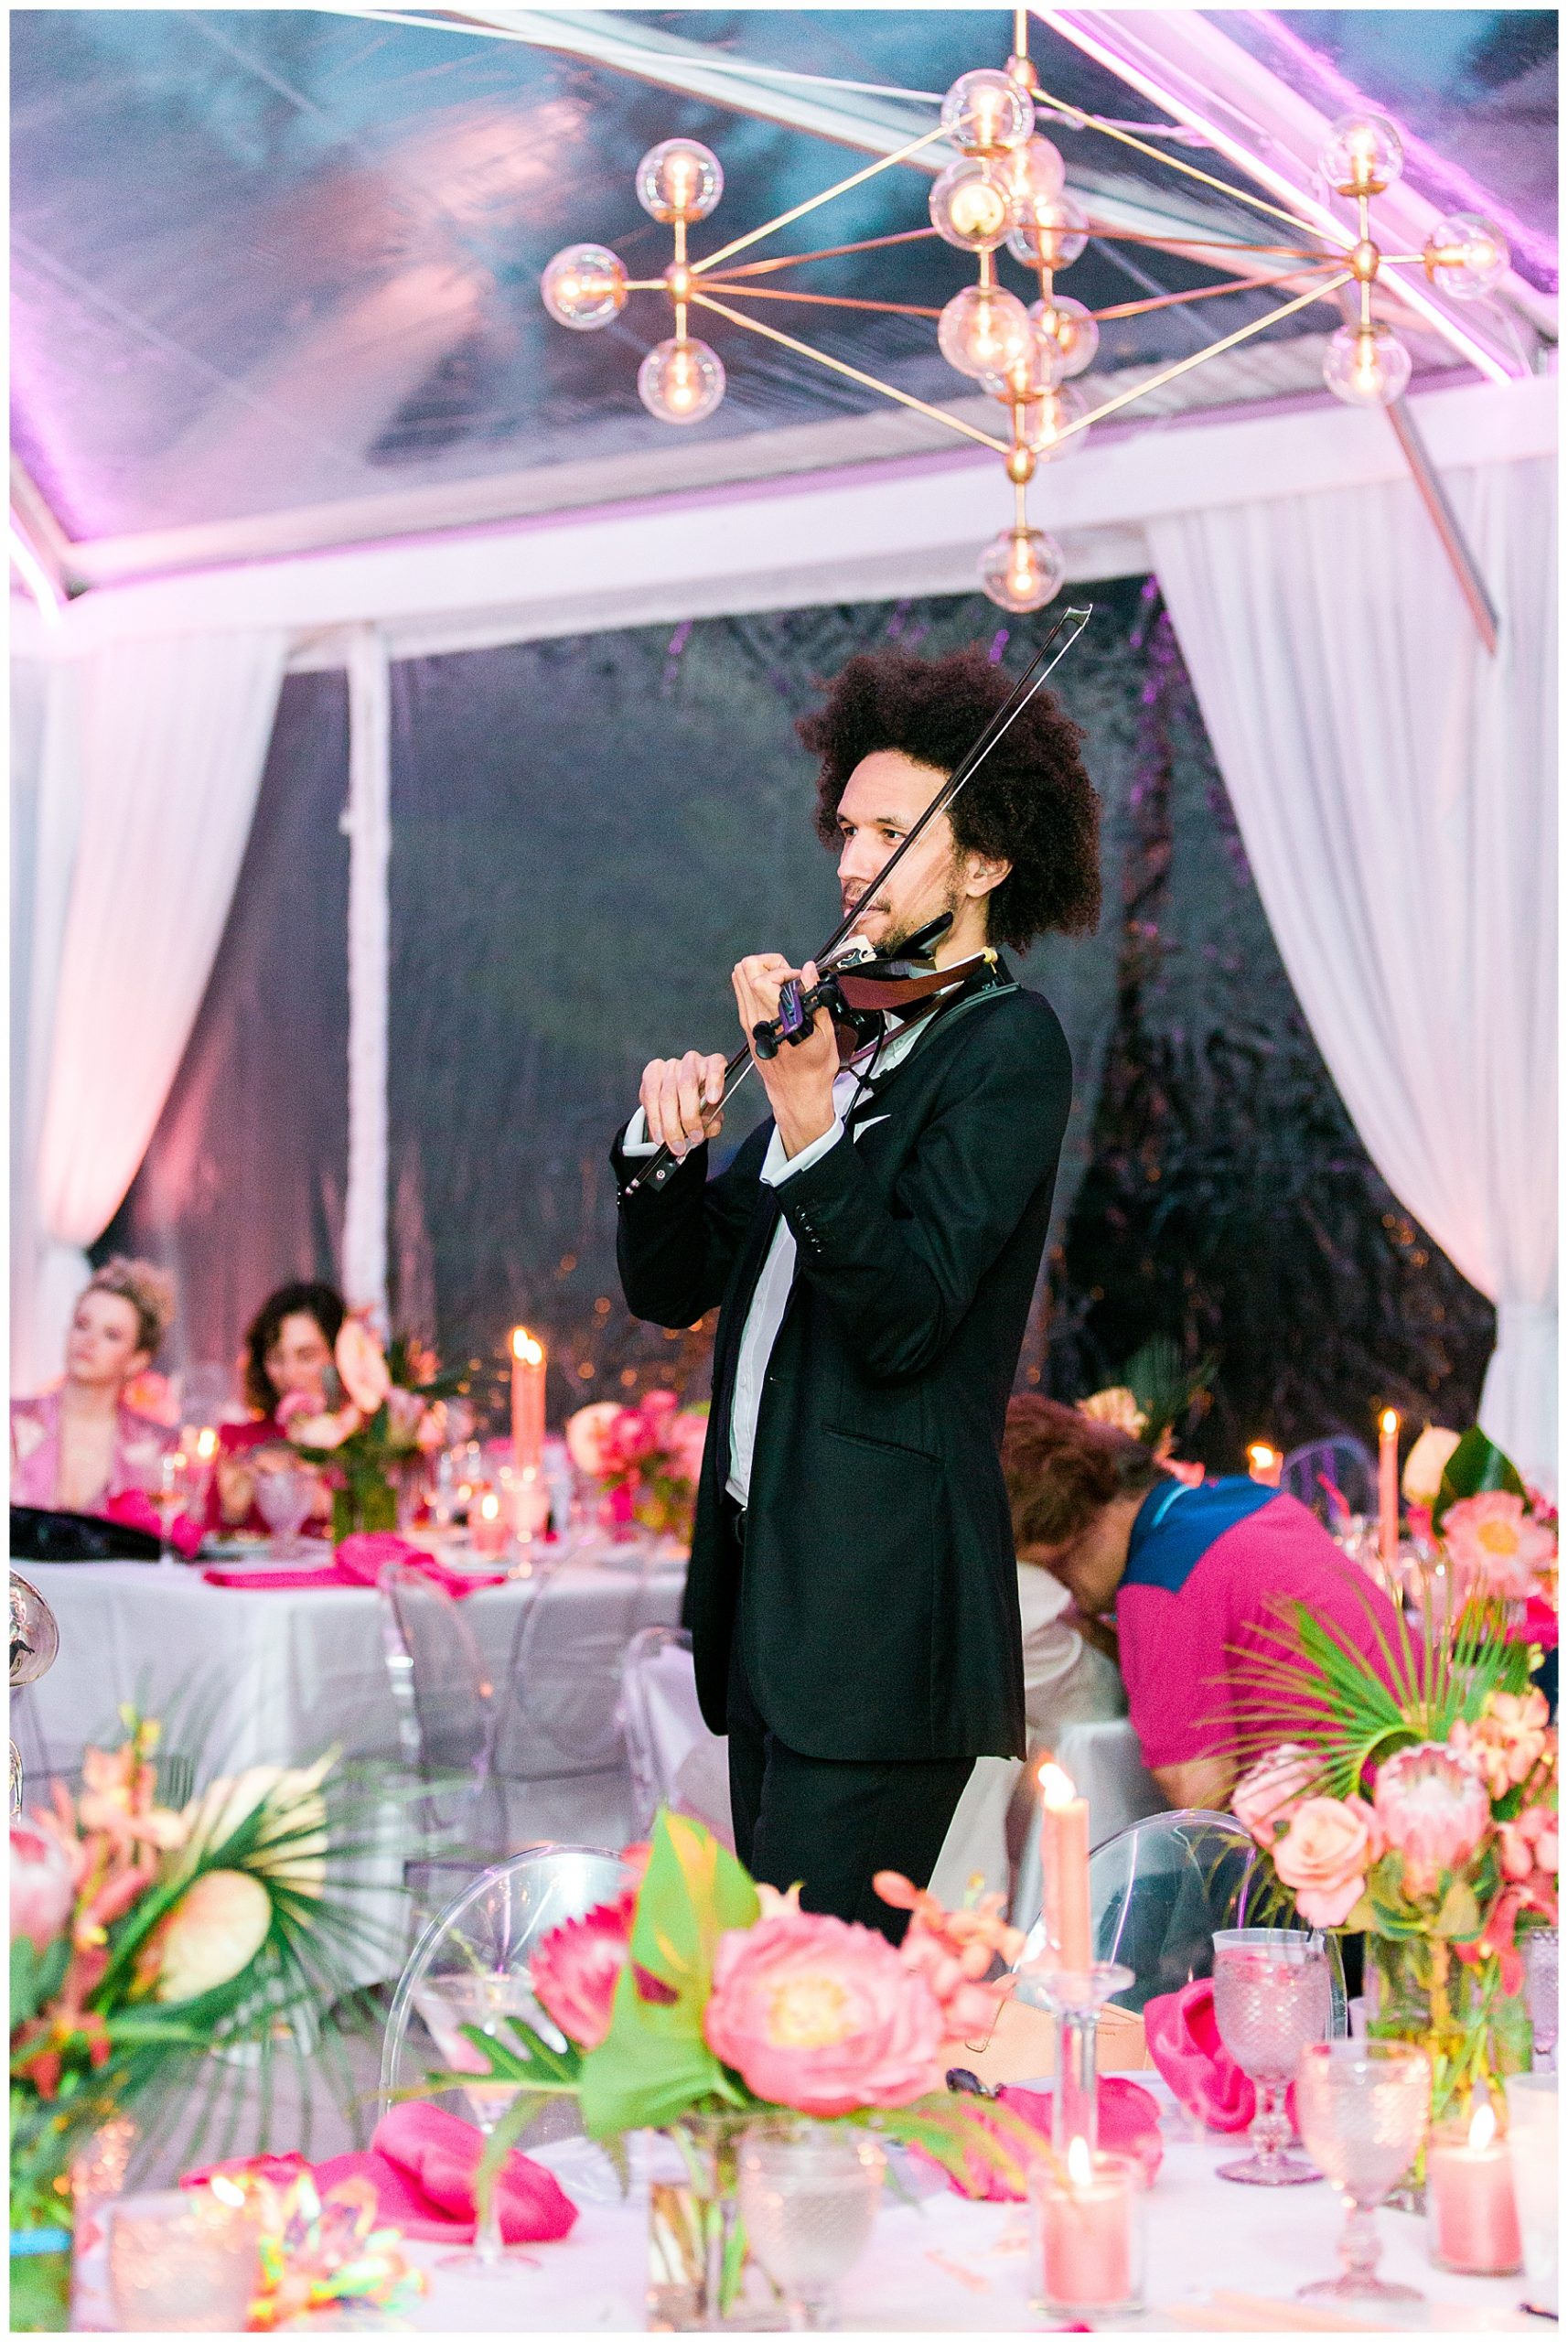 a violinist entertaining people at a party under a tent